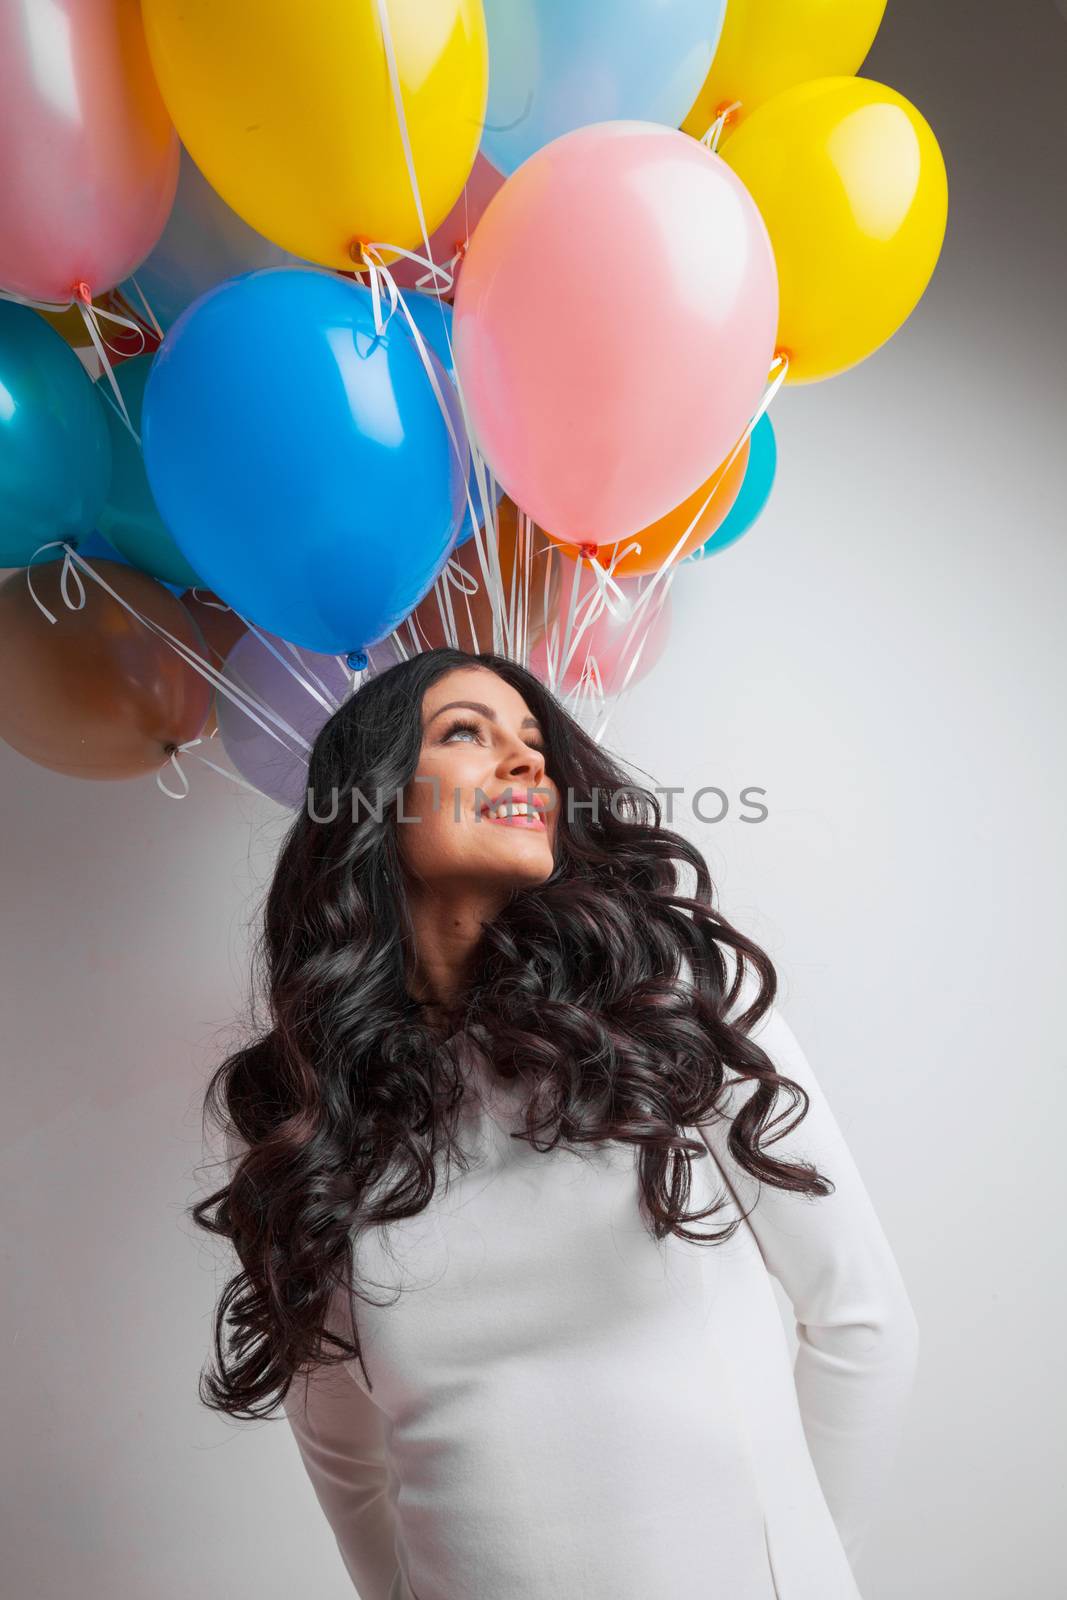 Cheerful woman holding many colorful balloons, celebration and happiness concept